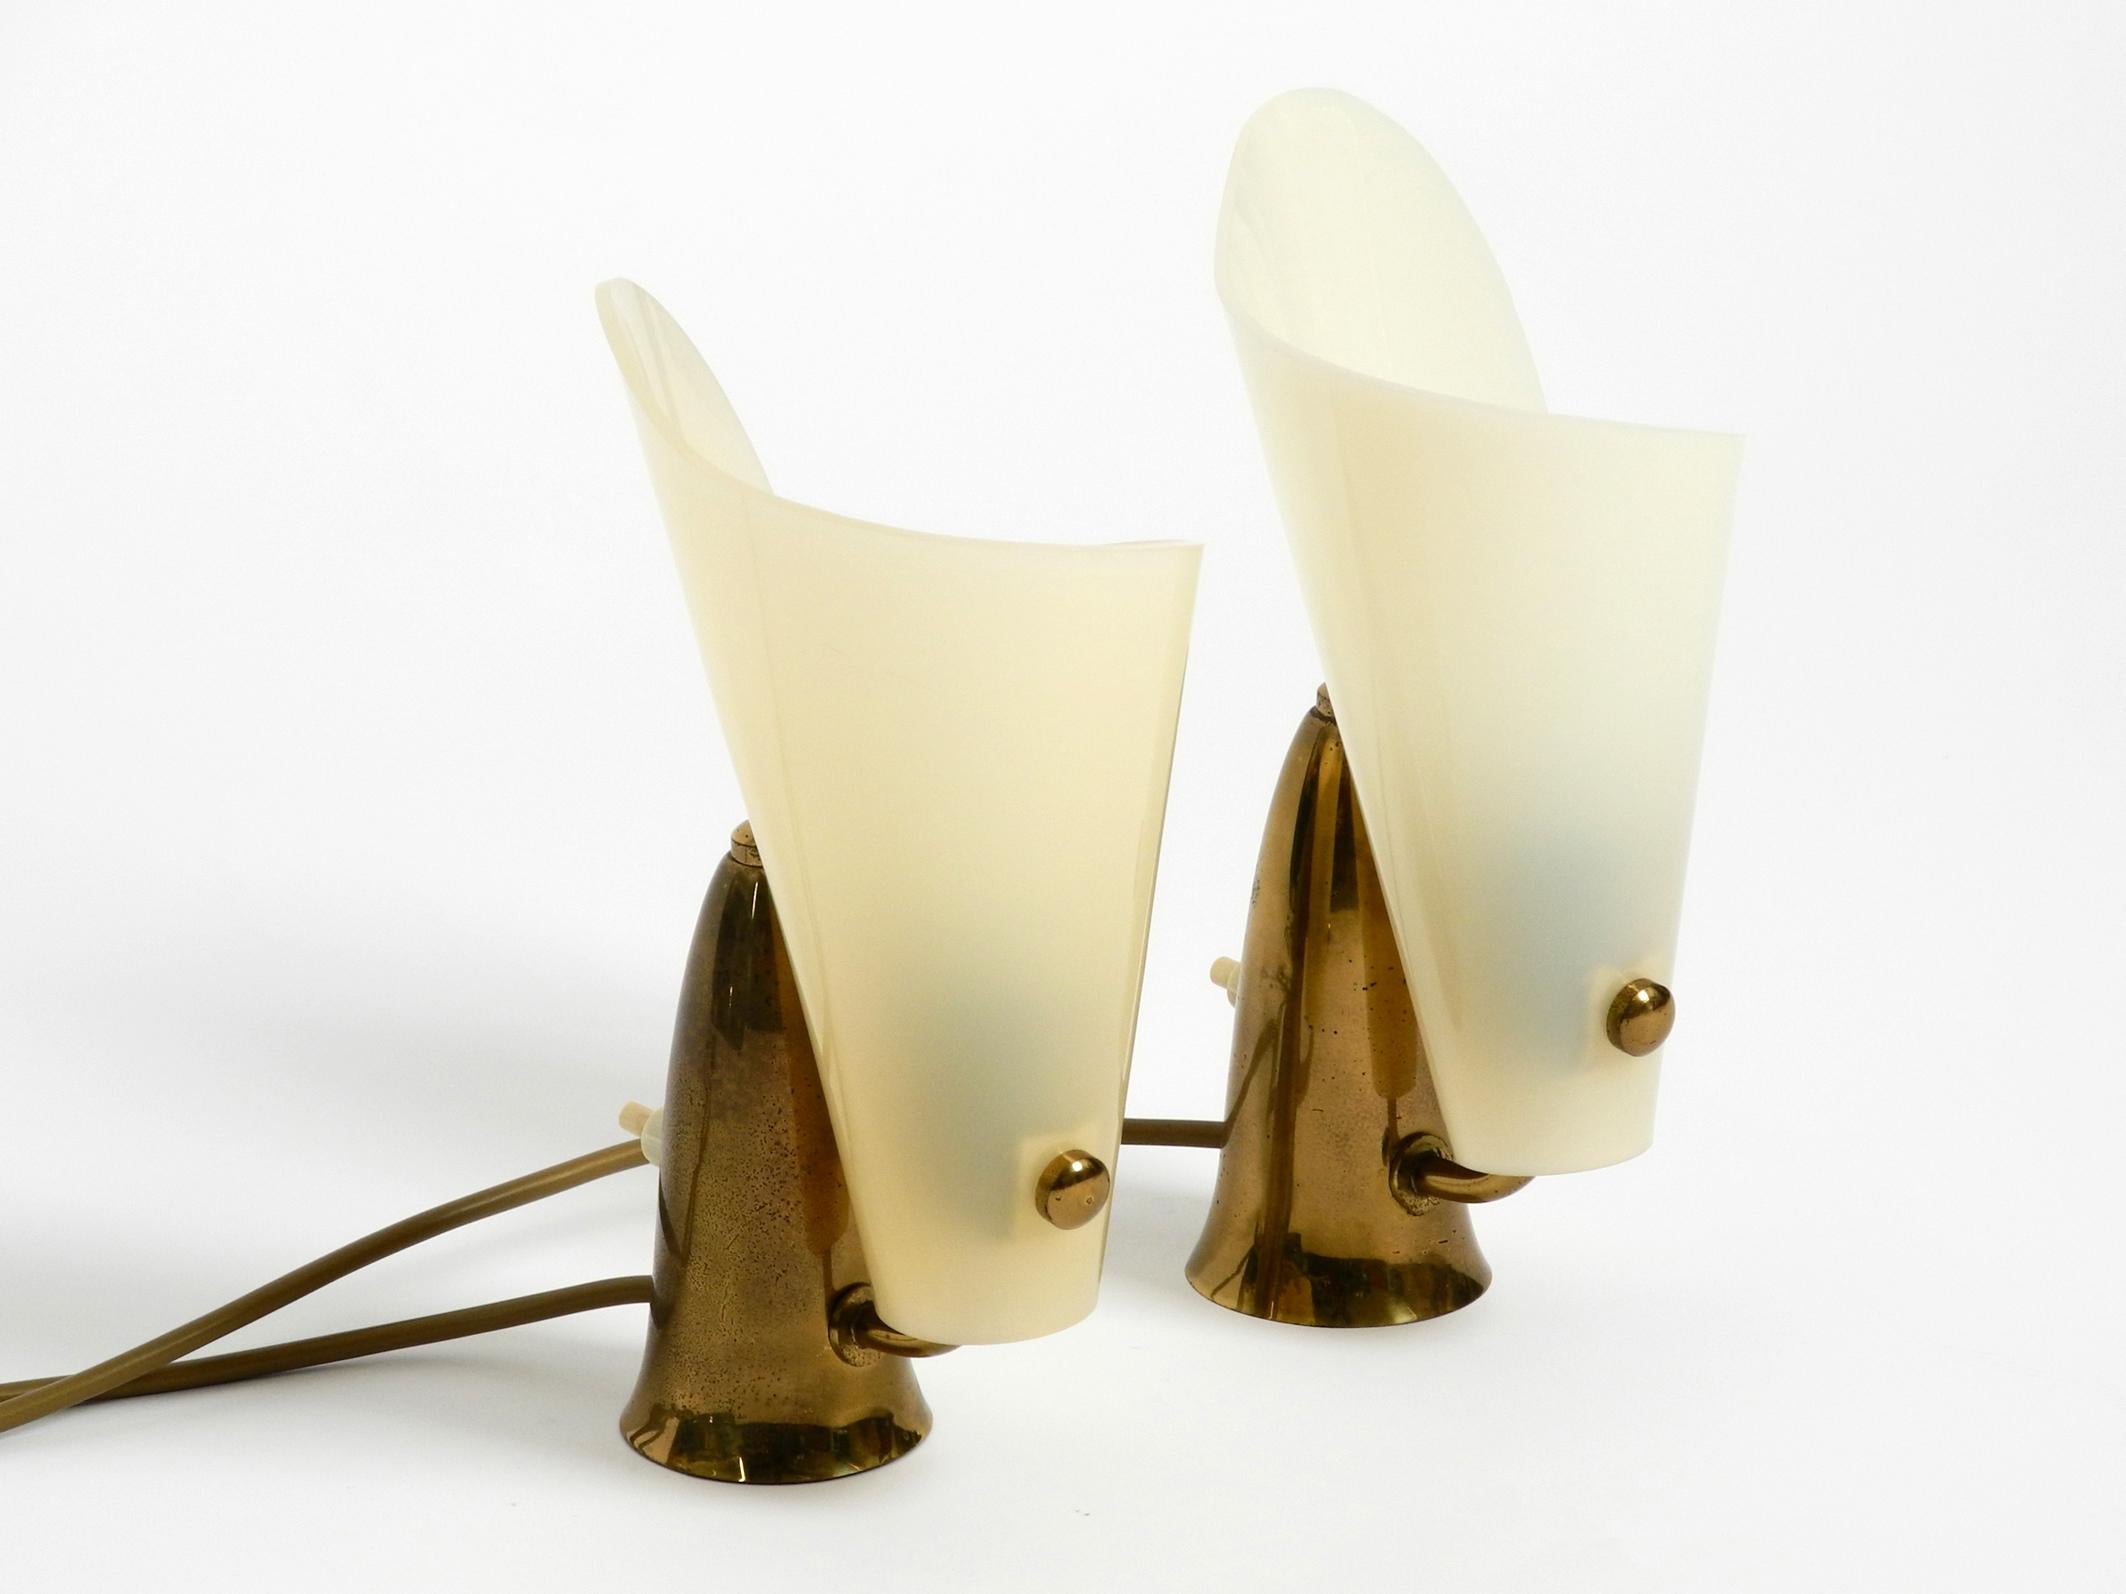 Pair of very rare and beautiful fancy Italian midcentury brass table night lamps
with plexiglass shades.
Fantastically beautiful Italian design with the brass bases and the rolled shades
made of plexiglass.
Typical design from that time, in a